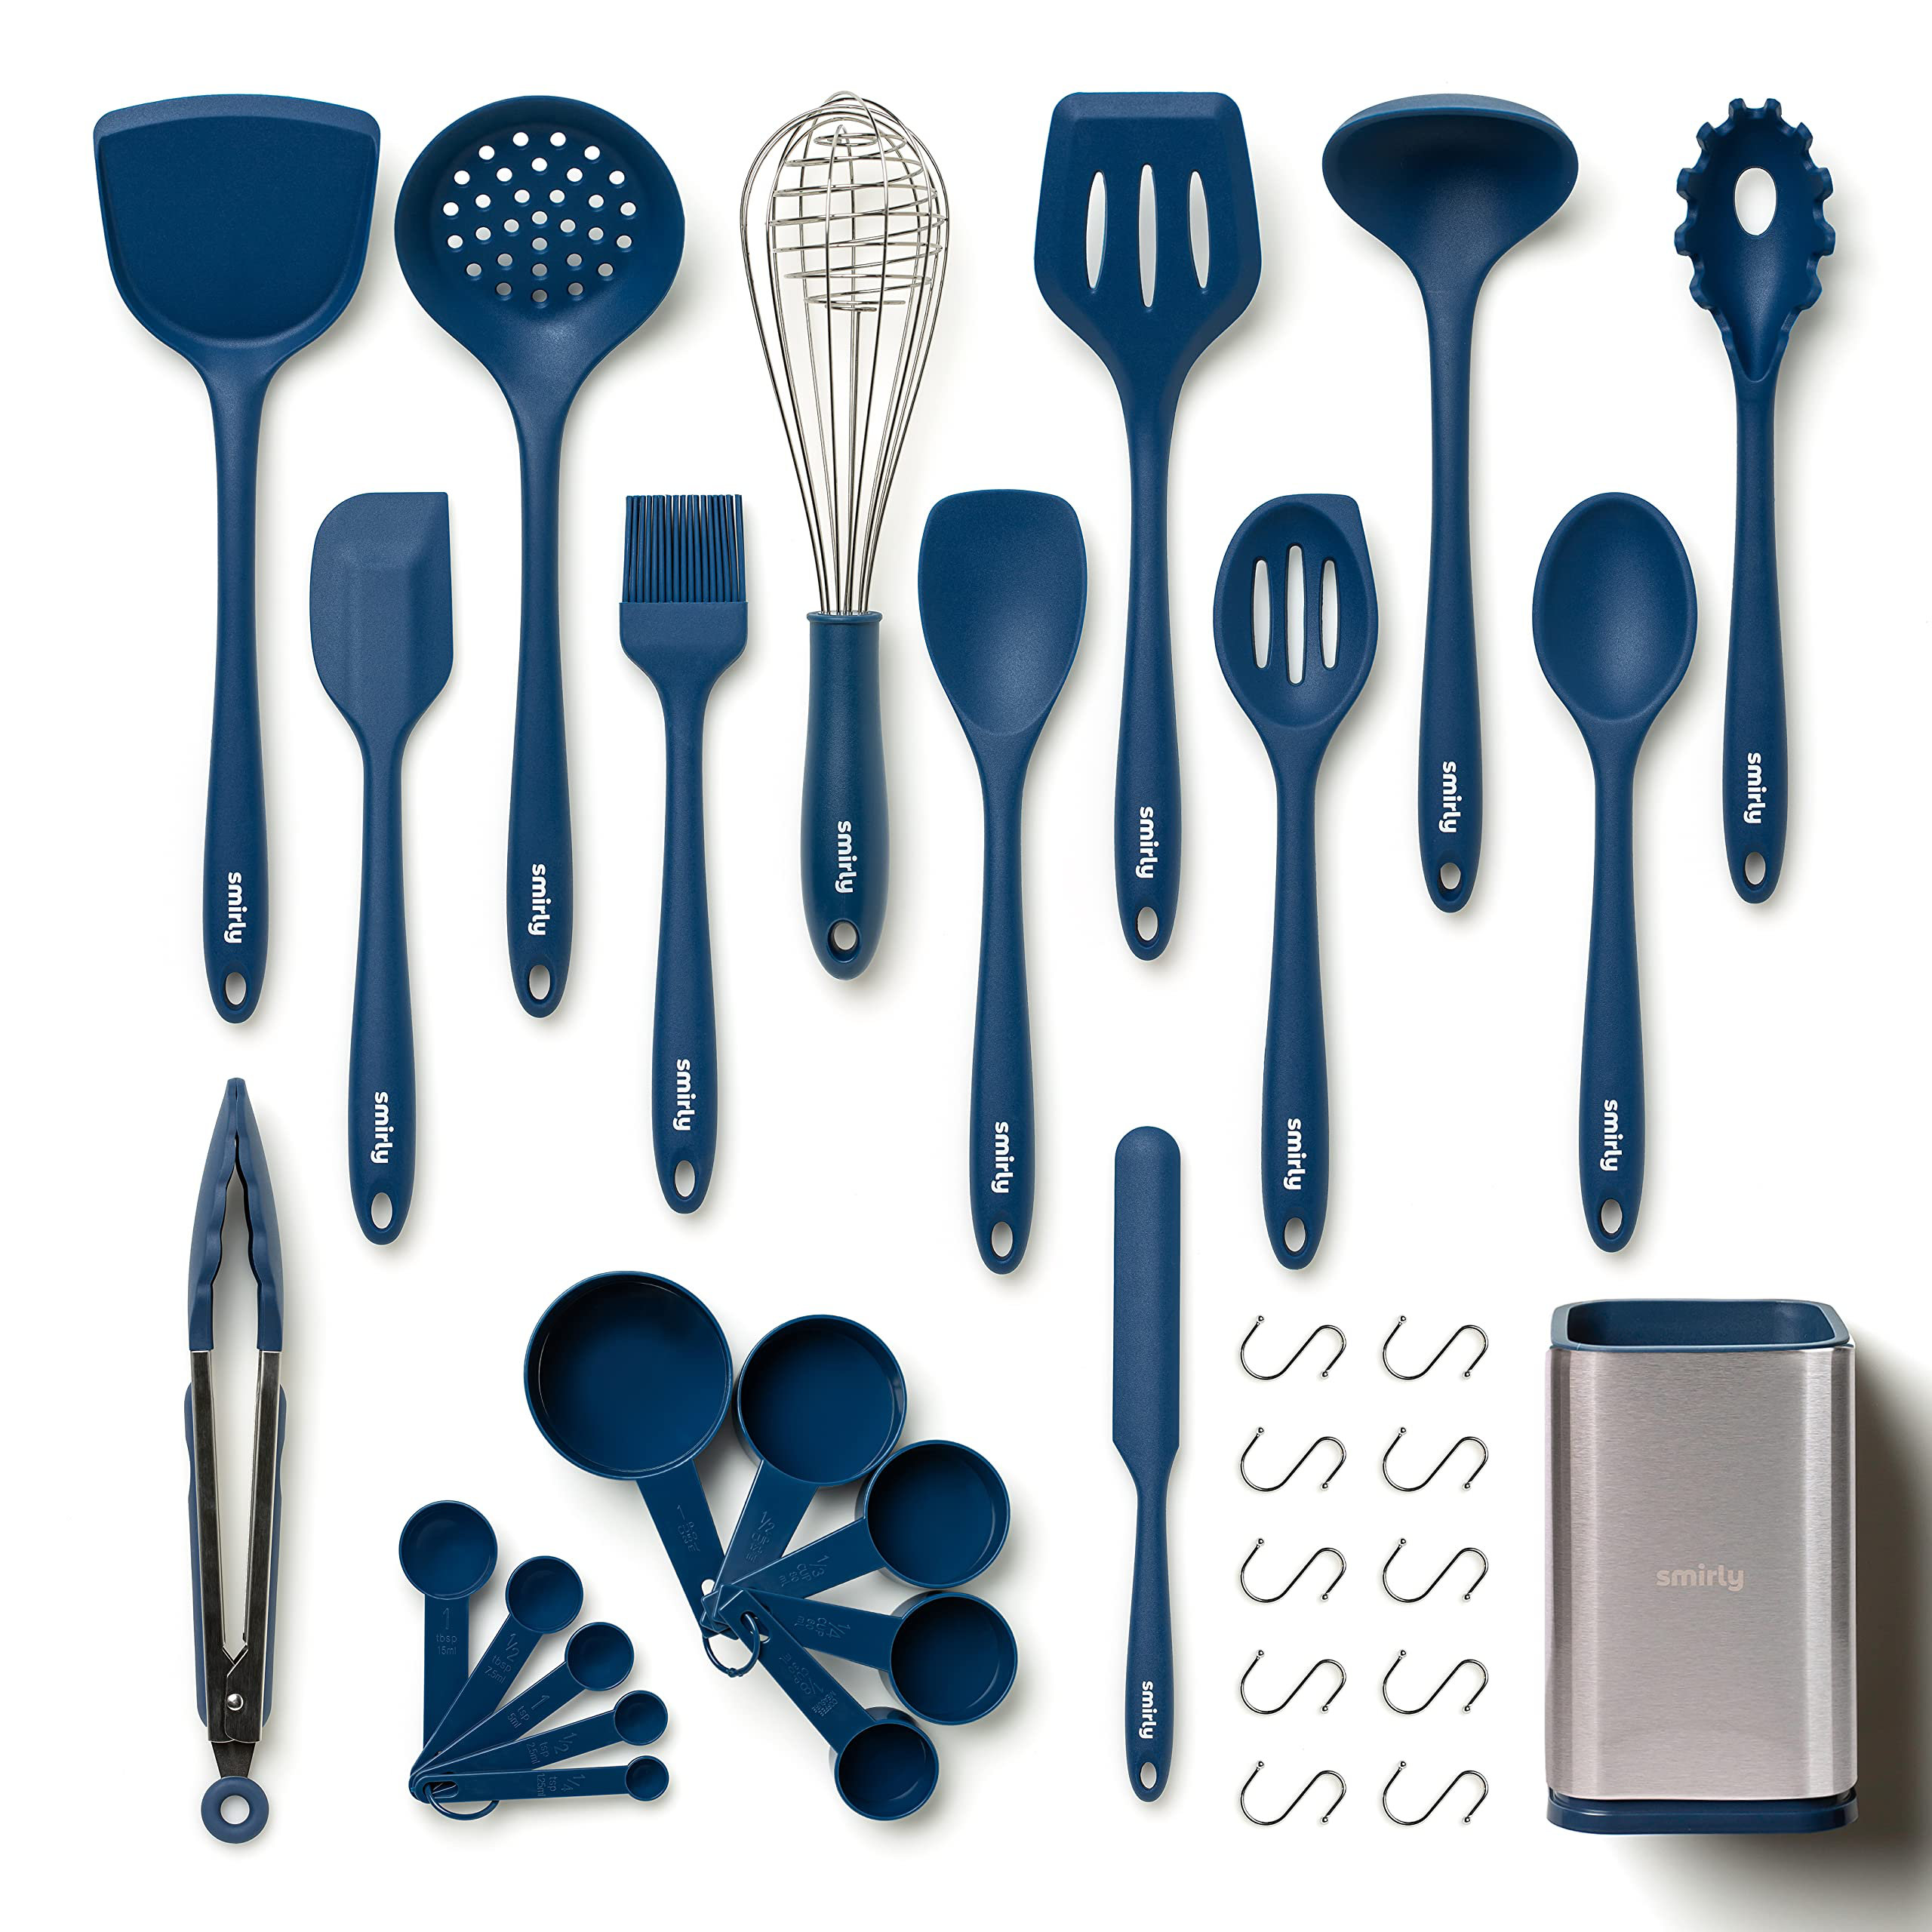 OXO Good Grips 15-Piece Everyday Kitchen Utensil Set - Cooking